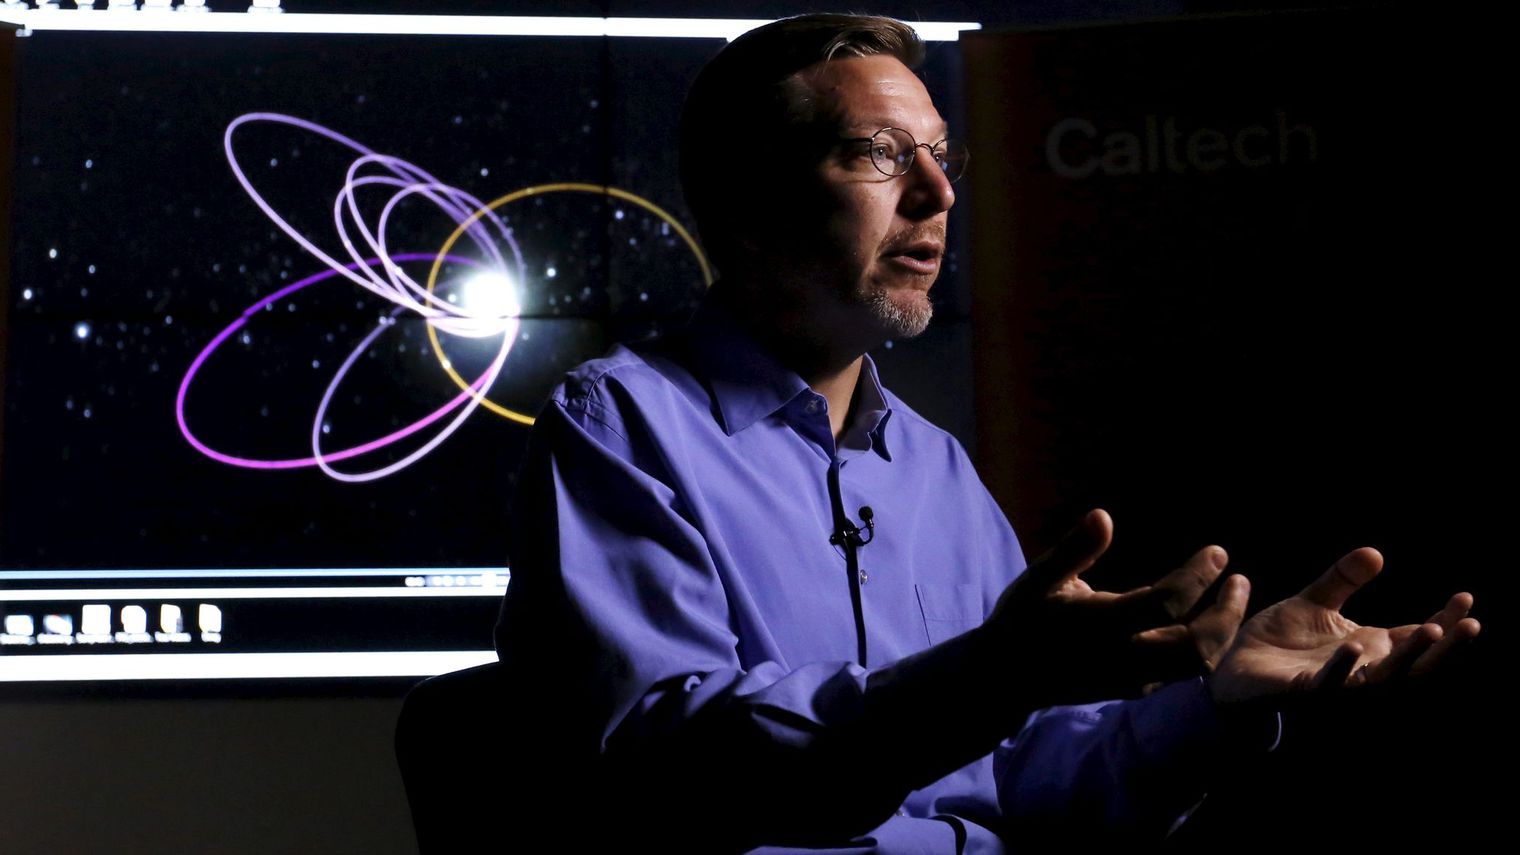 professor-of-planetary-astronomy-mike-brown-speaks-in-front-of-a-computer-simulation-of-the-probable-orbit-of-planet-nine-at-the-california-institute-of-technology-in-pasadena-california_5501427.jpg